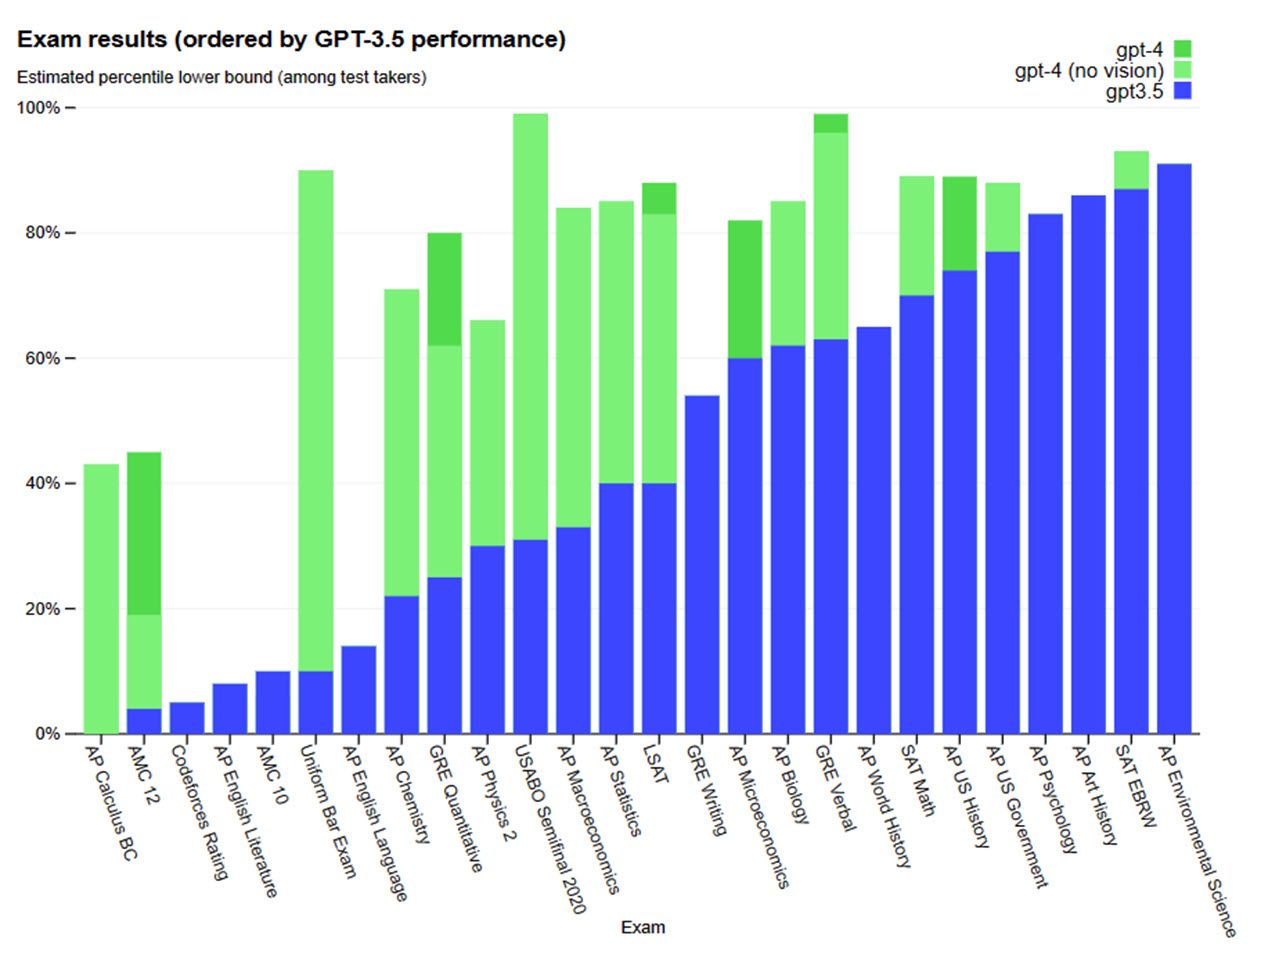 A graph comparing GPT-4's academic exam performance to GPT-3.5